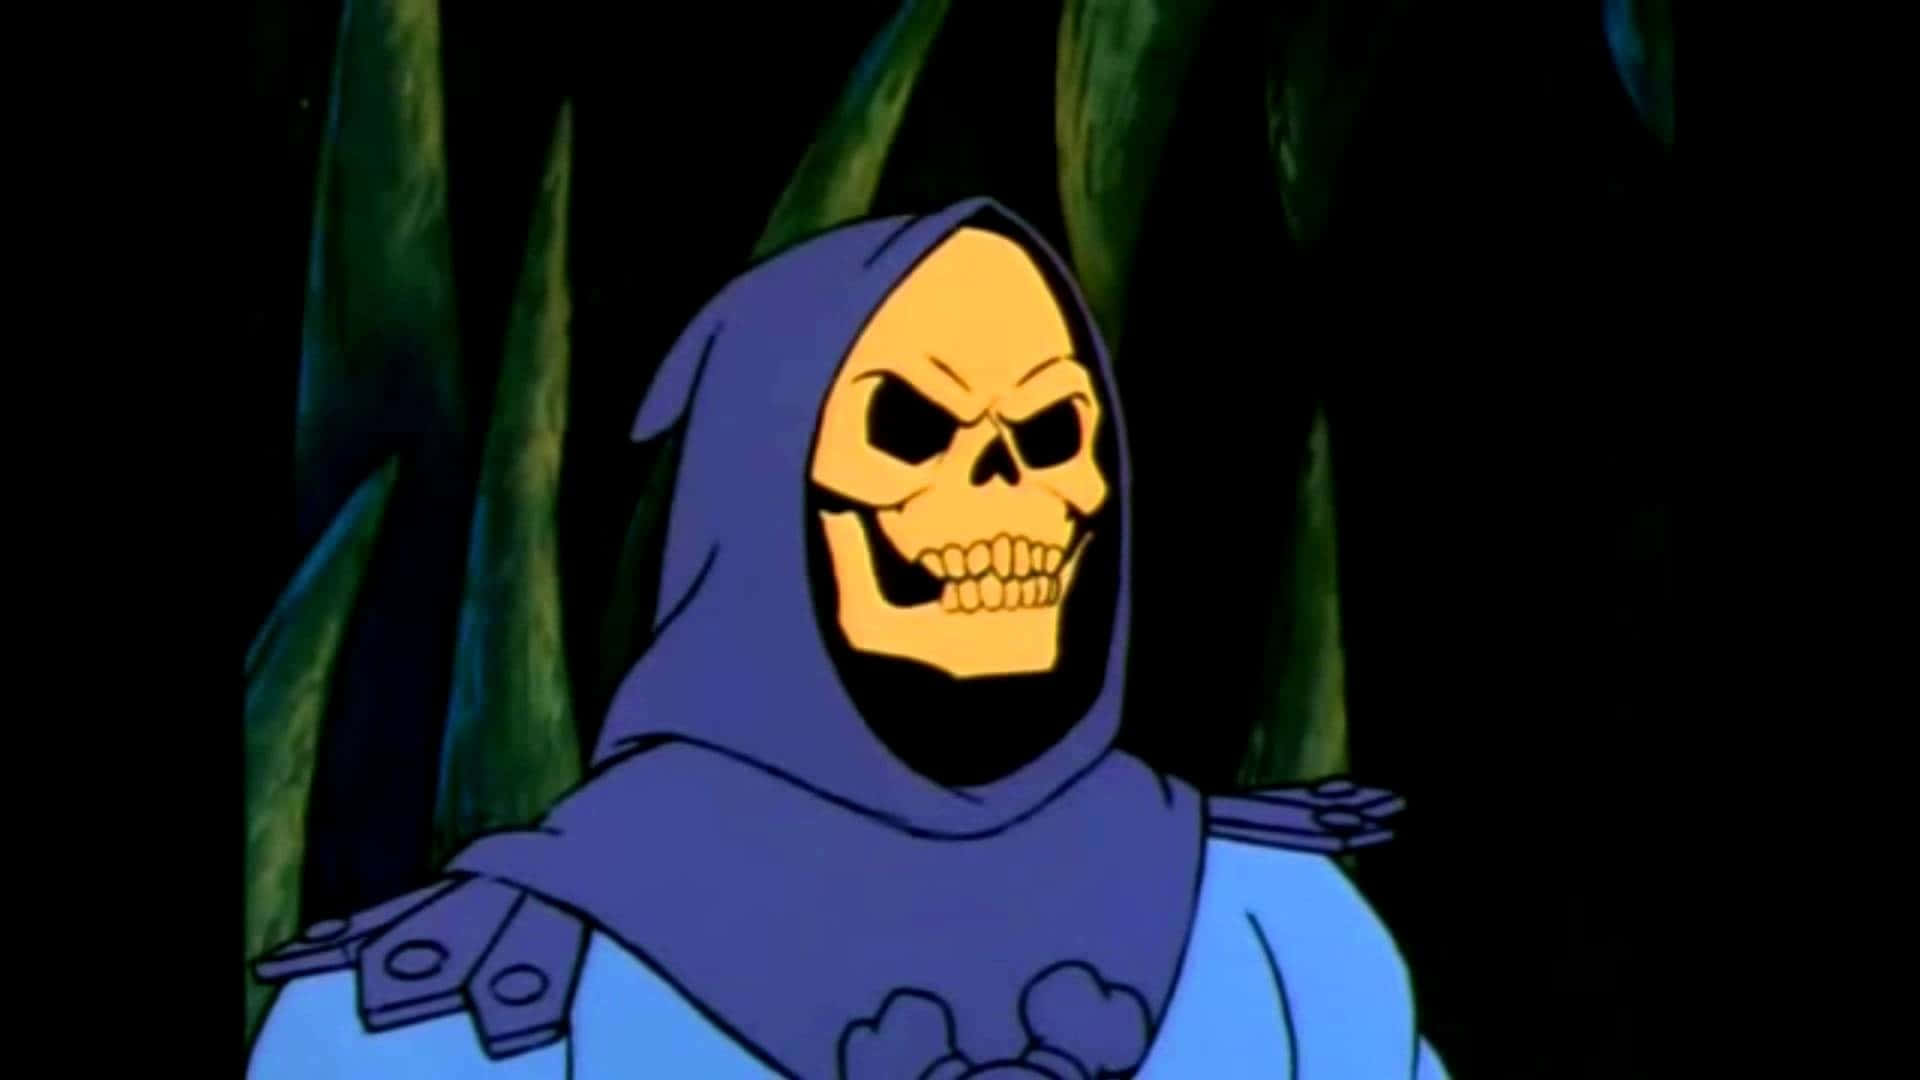 A Cartoon Character In A Blue Hooded Robe